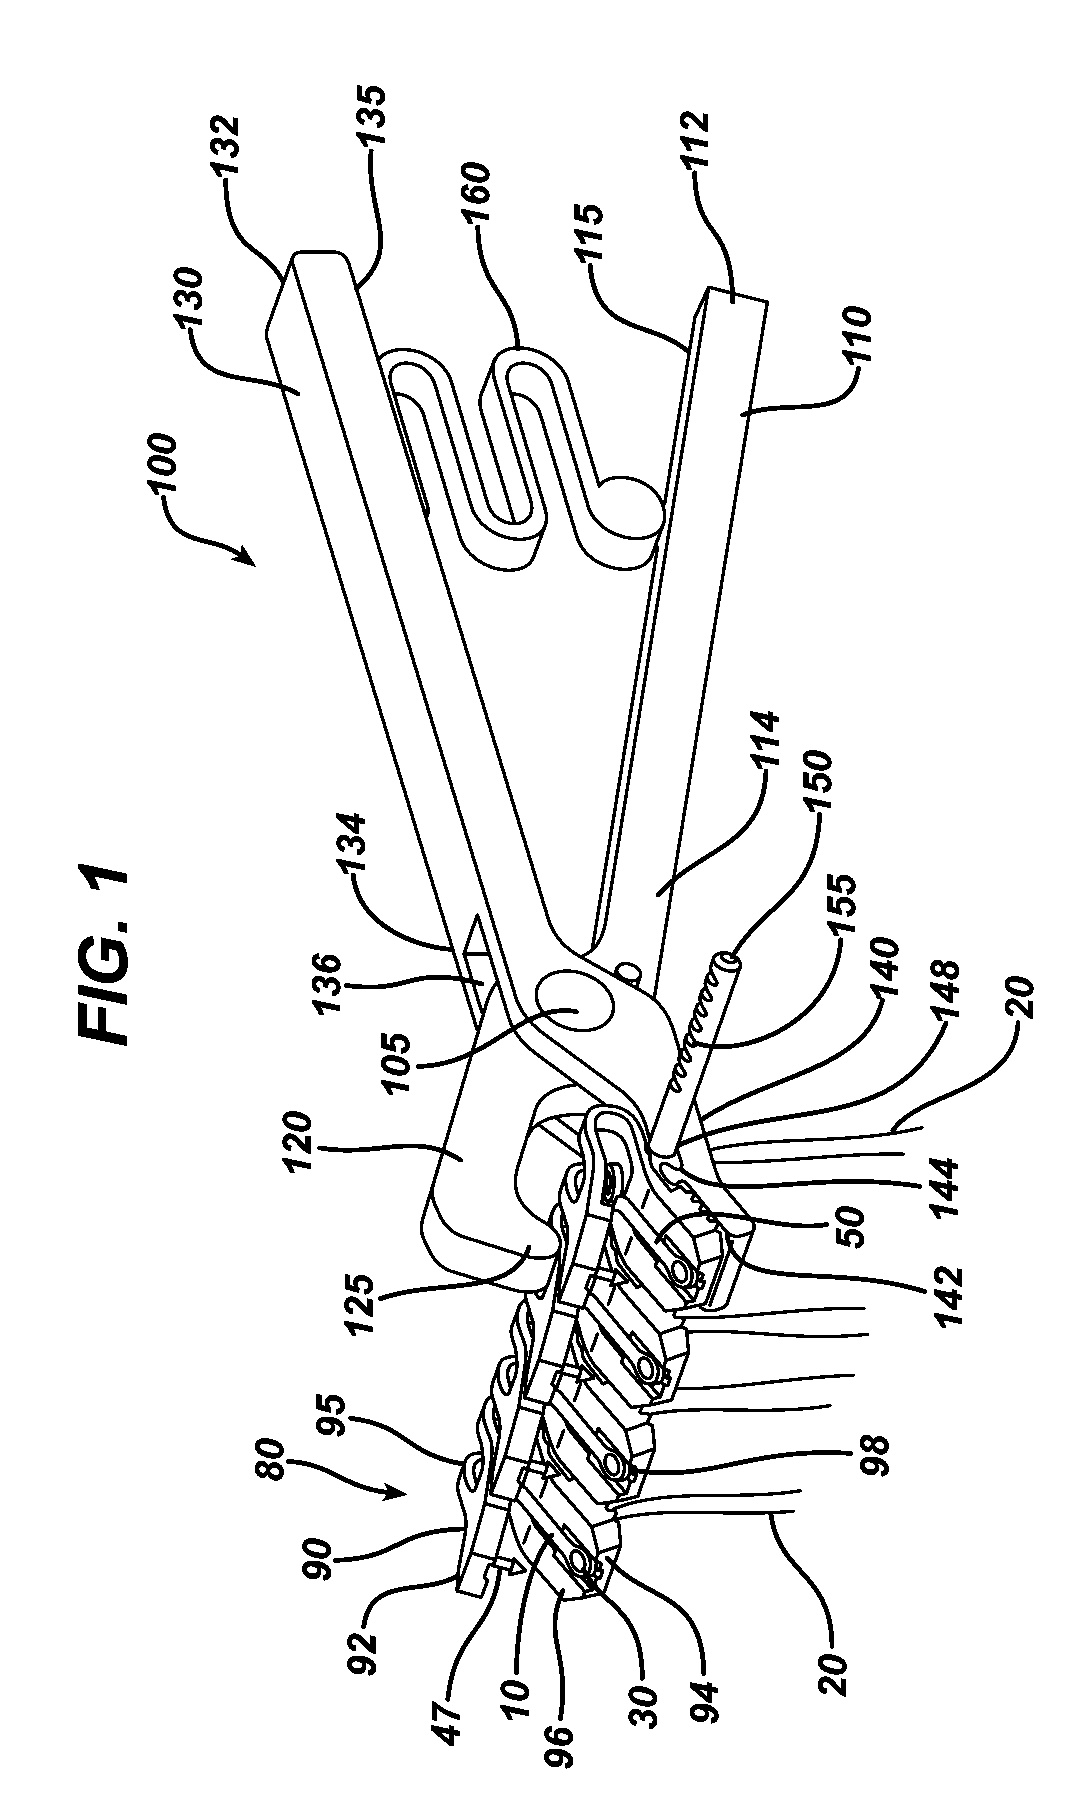 Method and Means to Attach Anchor Suture onto Mesh Implants